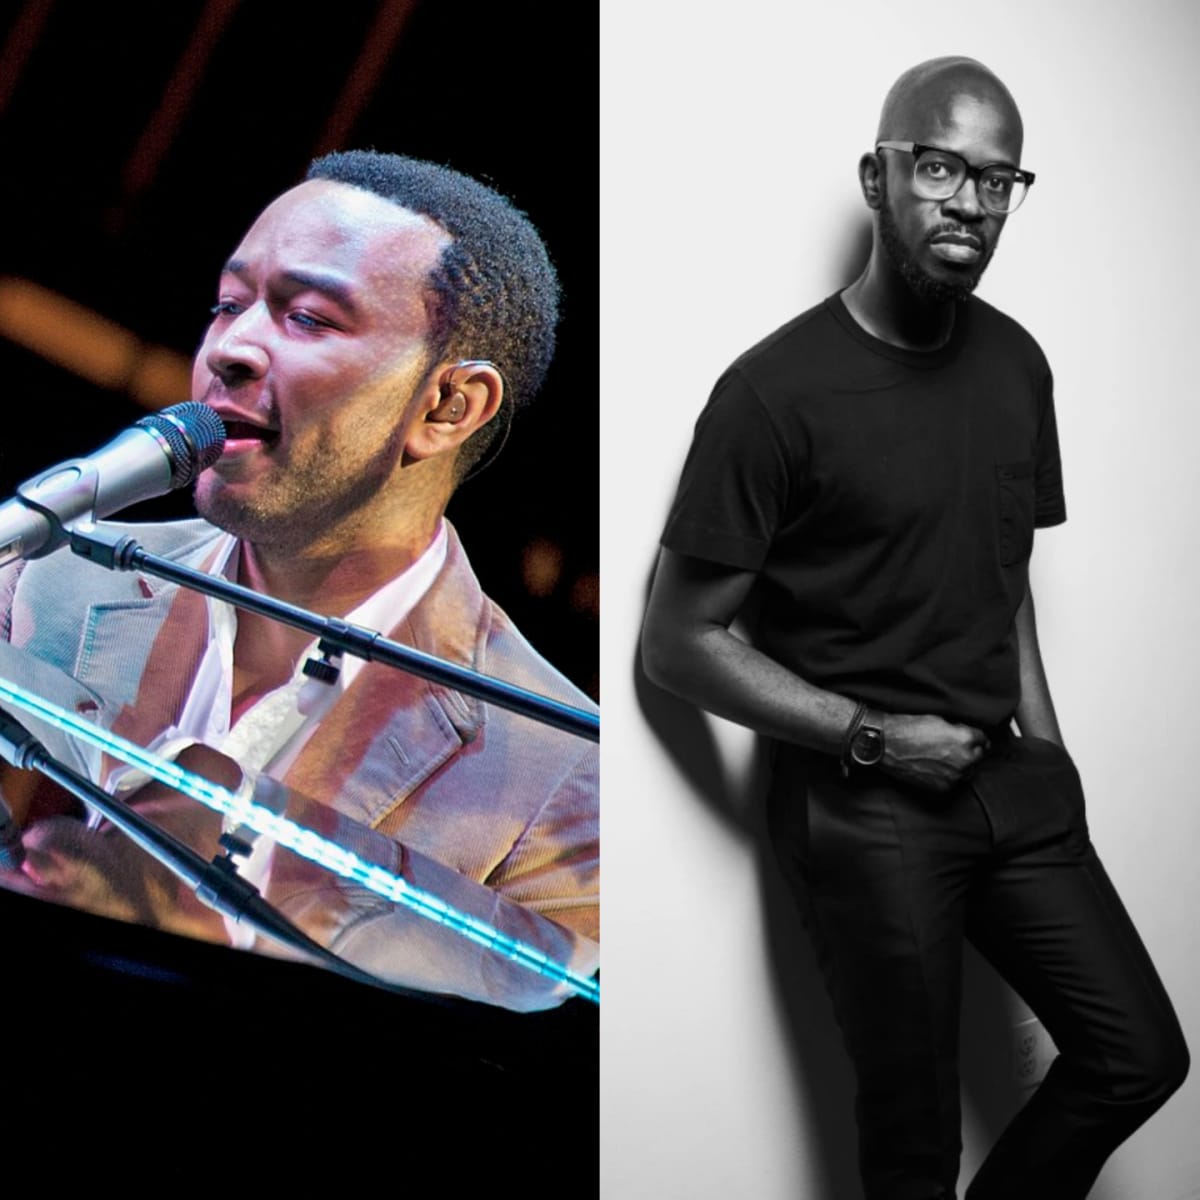 Submission to John Legend's TikTok Challenge Sparks Rumors of Collaboration With Black Coffee